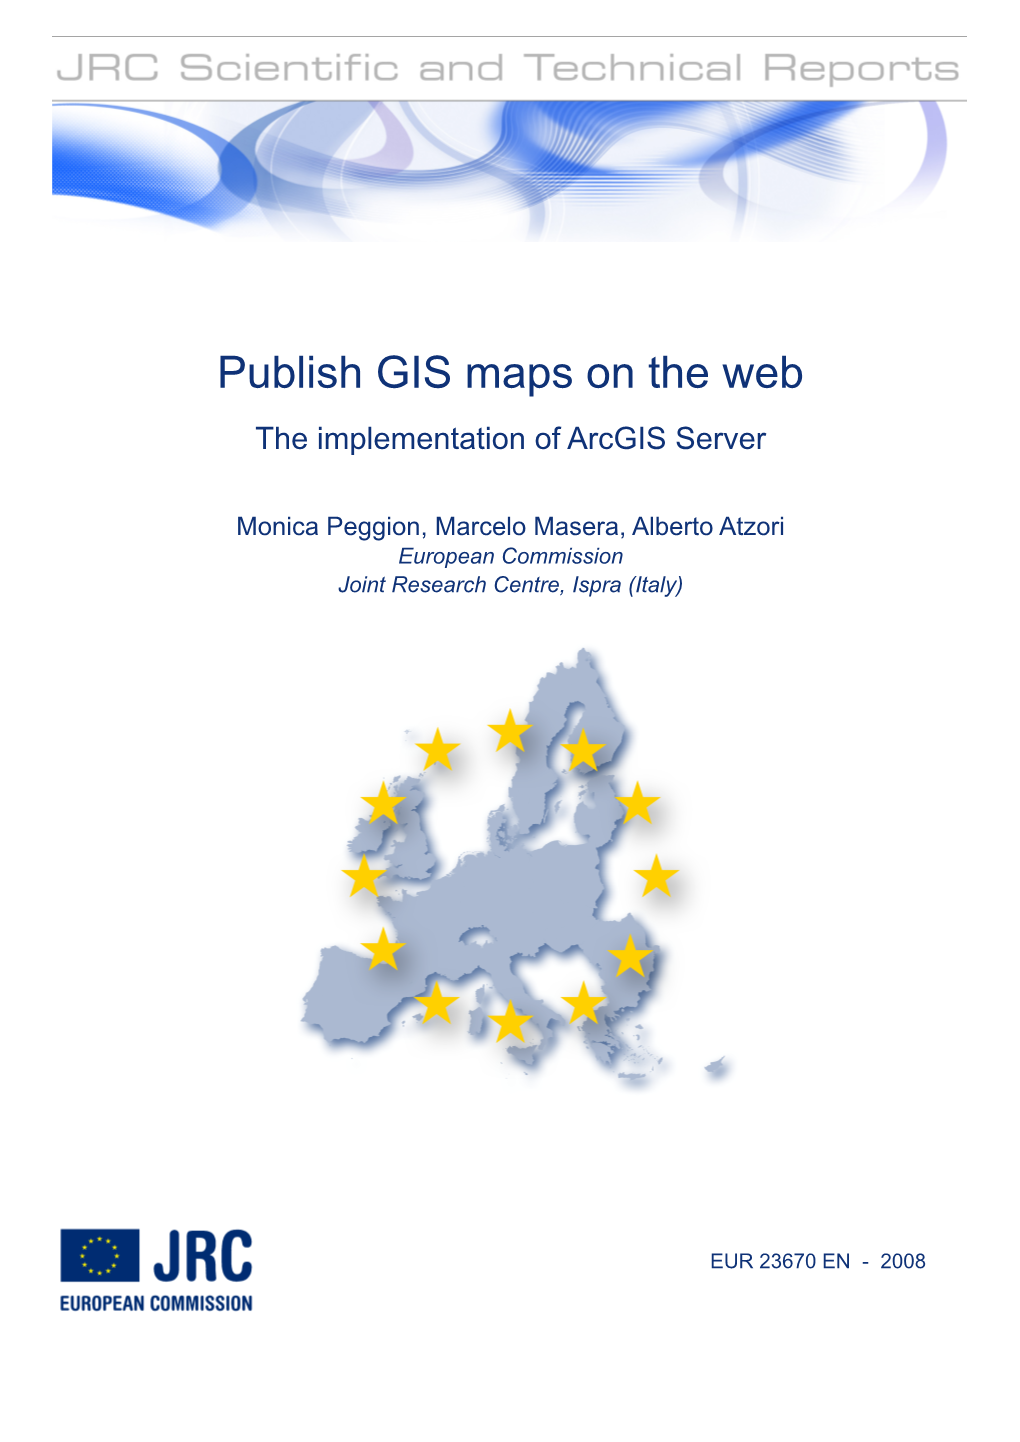 Publish GIS Maps on the Web the Implementation of Arcgis Server